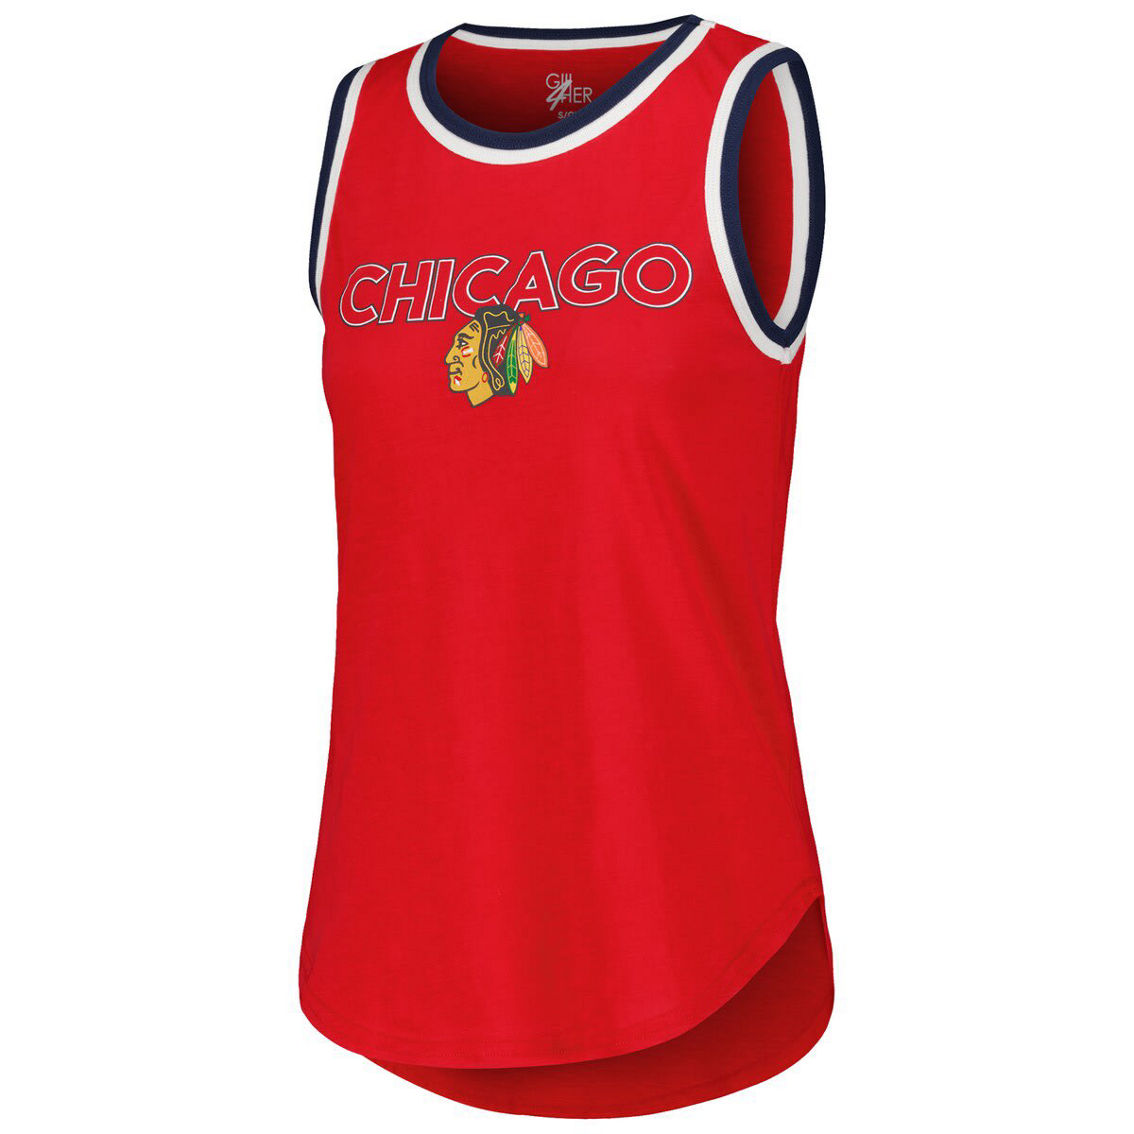 G-III 4Her by Carl Banks Women's Red Chicago Blackhawks Strategy Tank Top - Image 3 of 4